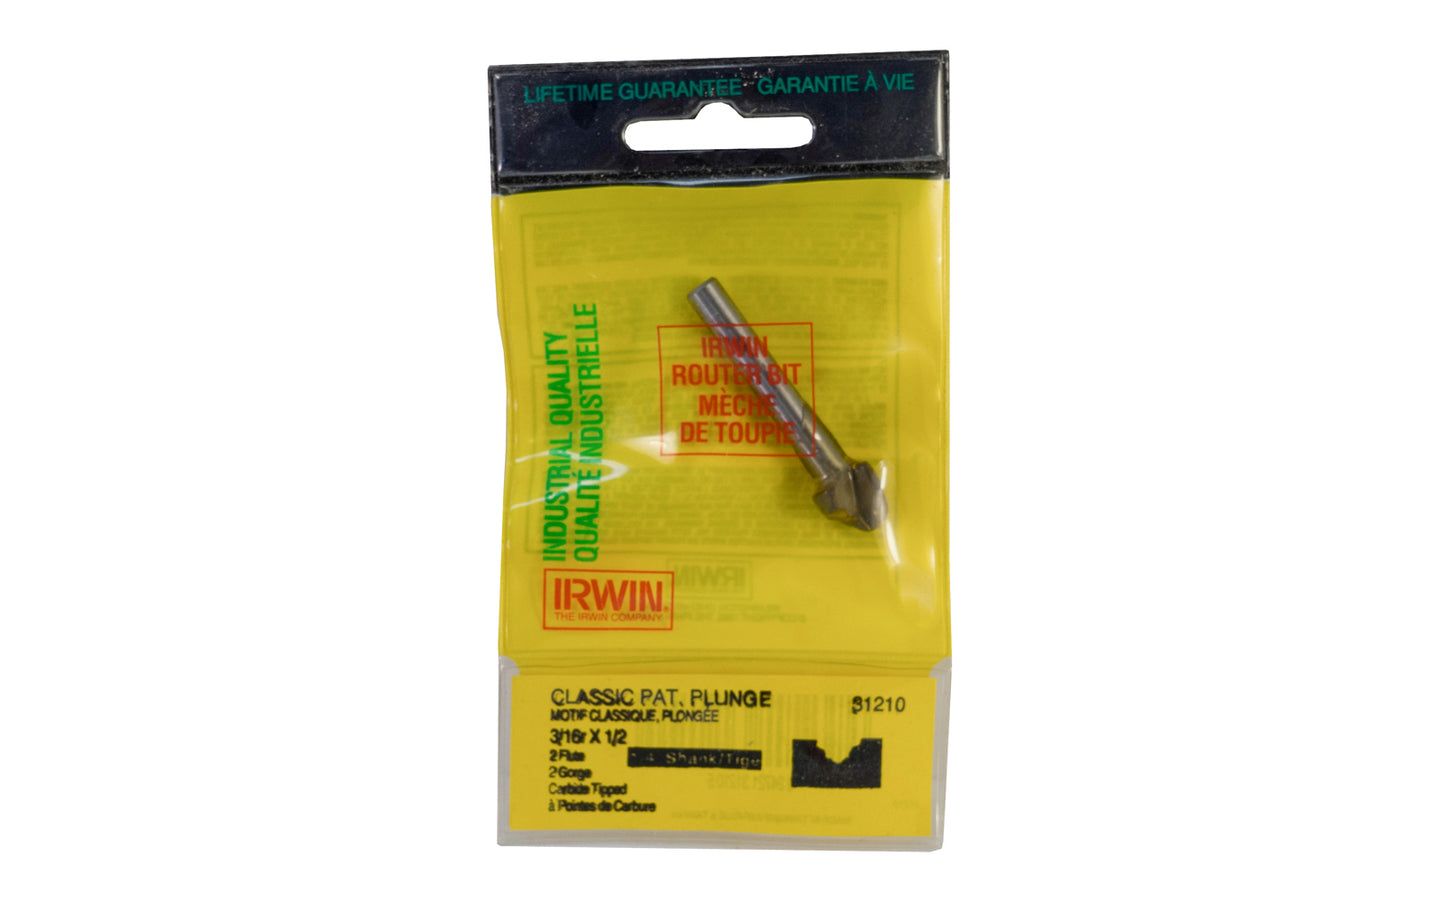 Irwin Carbide 3/16" Classic Pattern Plunge Router Bit. Carbide Tipped Router Bit. 2" overall length. 1/4" shank. Irwin Model No. 31210.